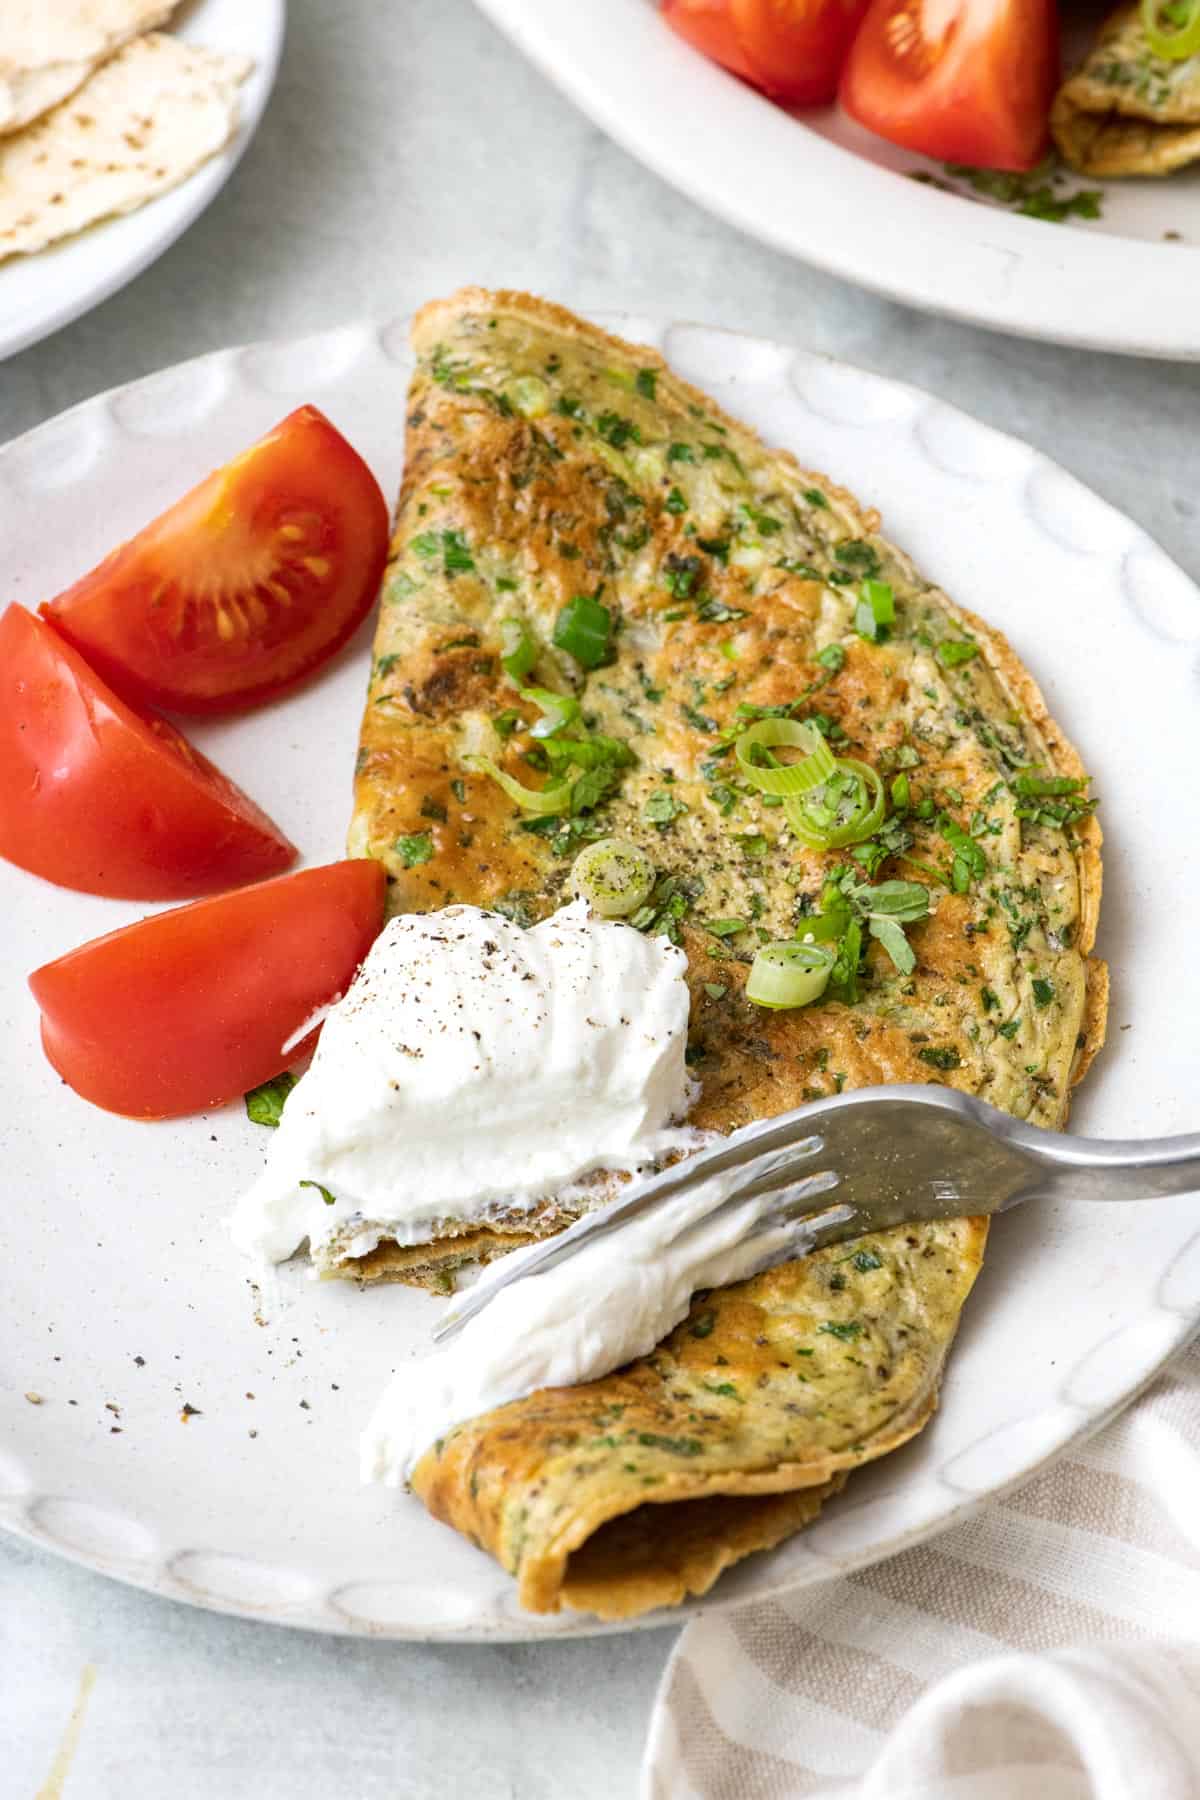 Fork cutting into a Lebanese style omelette called "Ejjeh" topped with yogurt and green onions on a plate with quartered tomatoes.